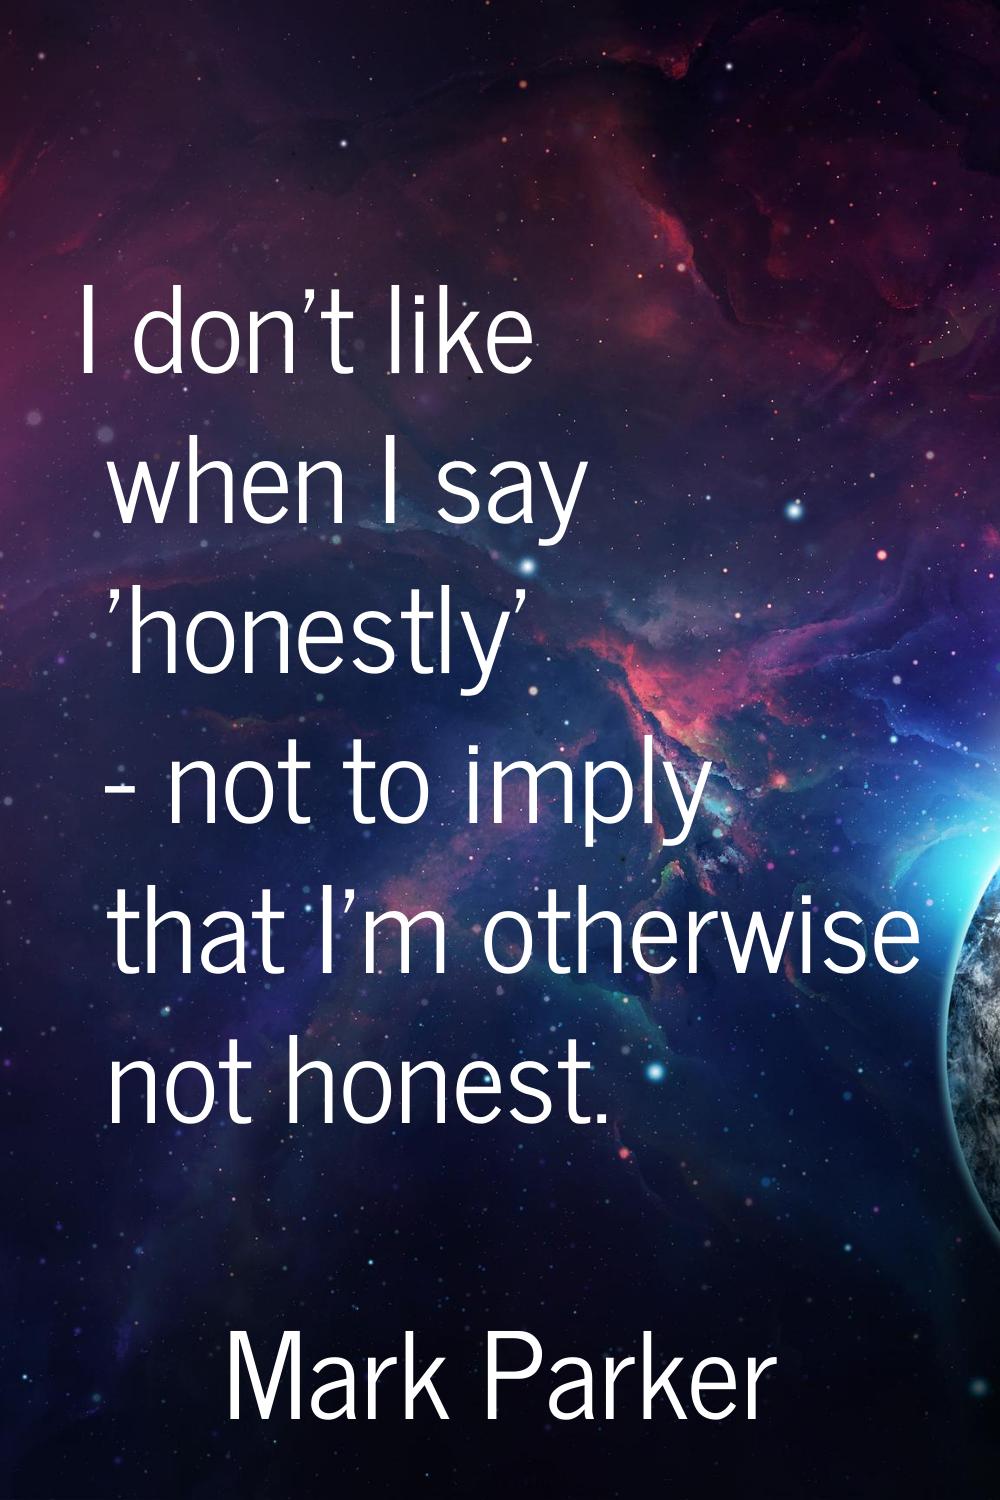 I don't like when I say 'honestly' - not to imply that I'm otherwise not honest.